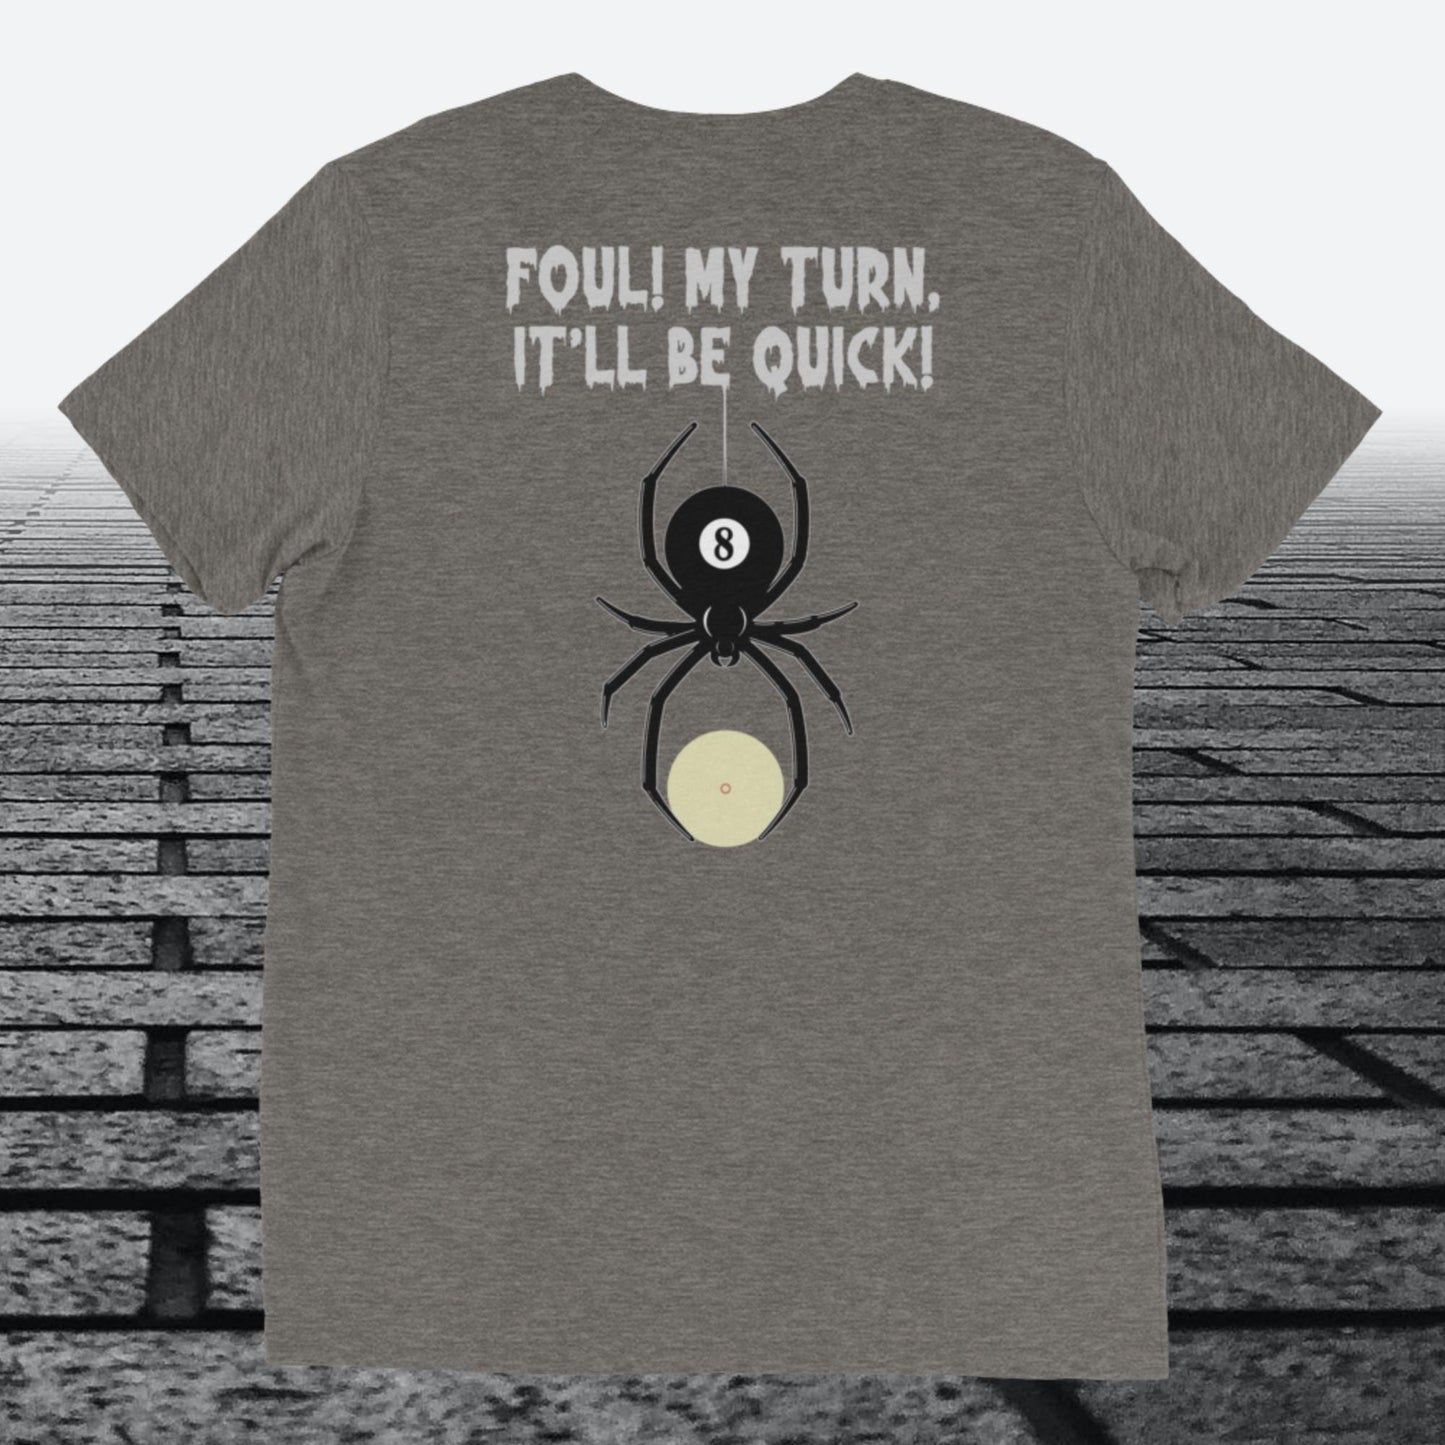 Foul, my turn, It'll be quick, with logo on front, Tri-blend t-shirt